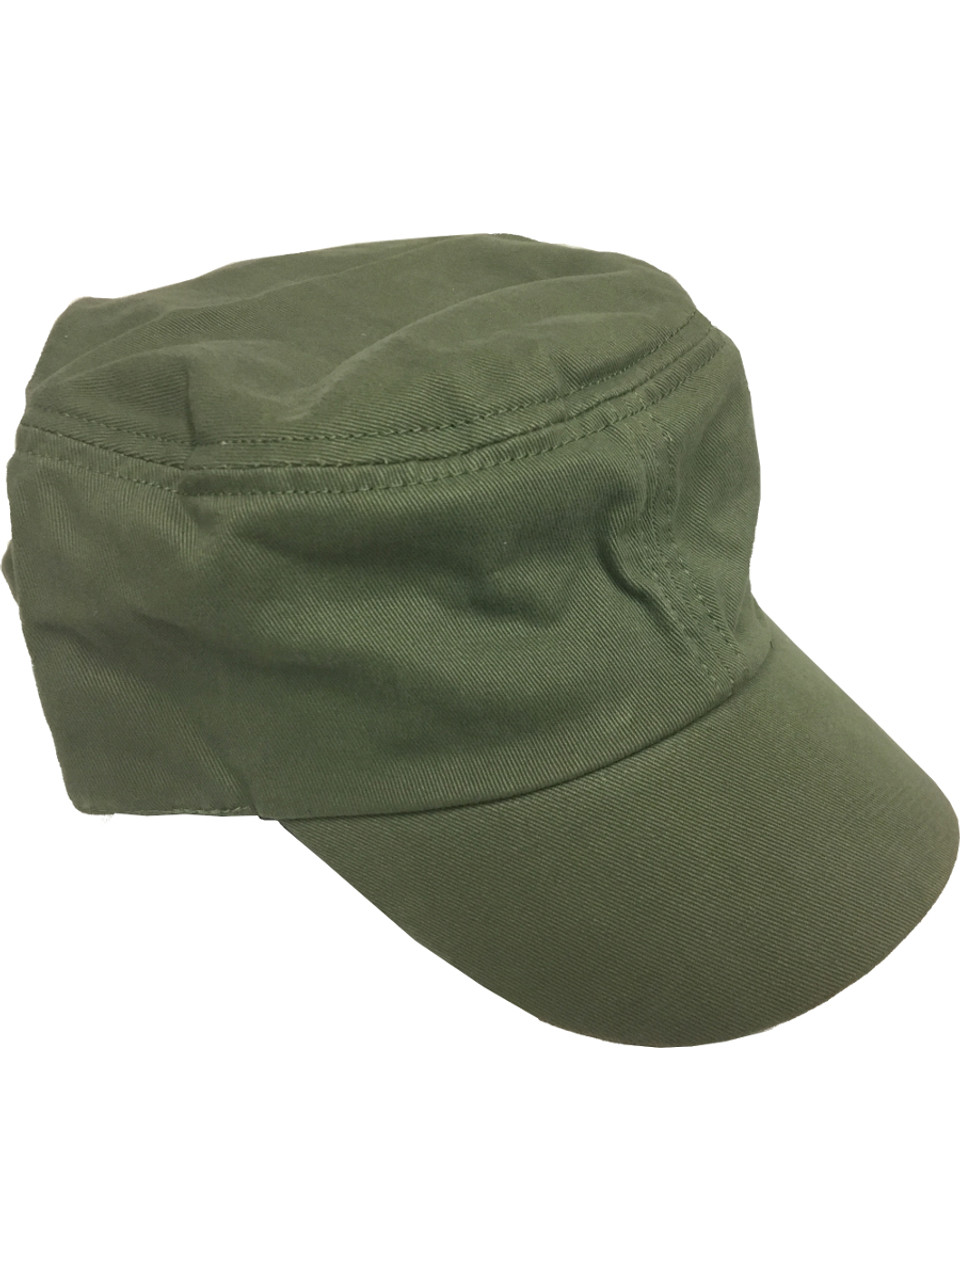 Adult's Green Military Cadet Hat